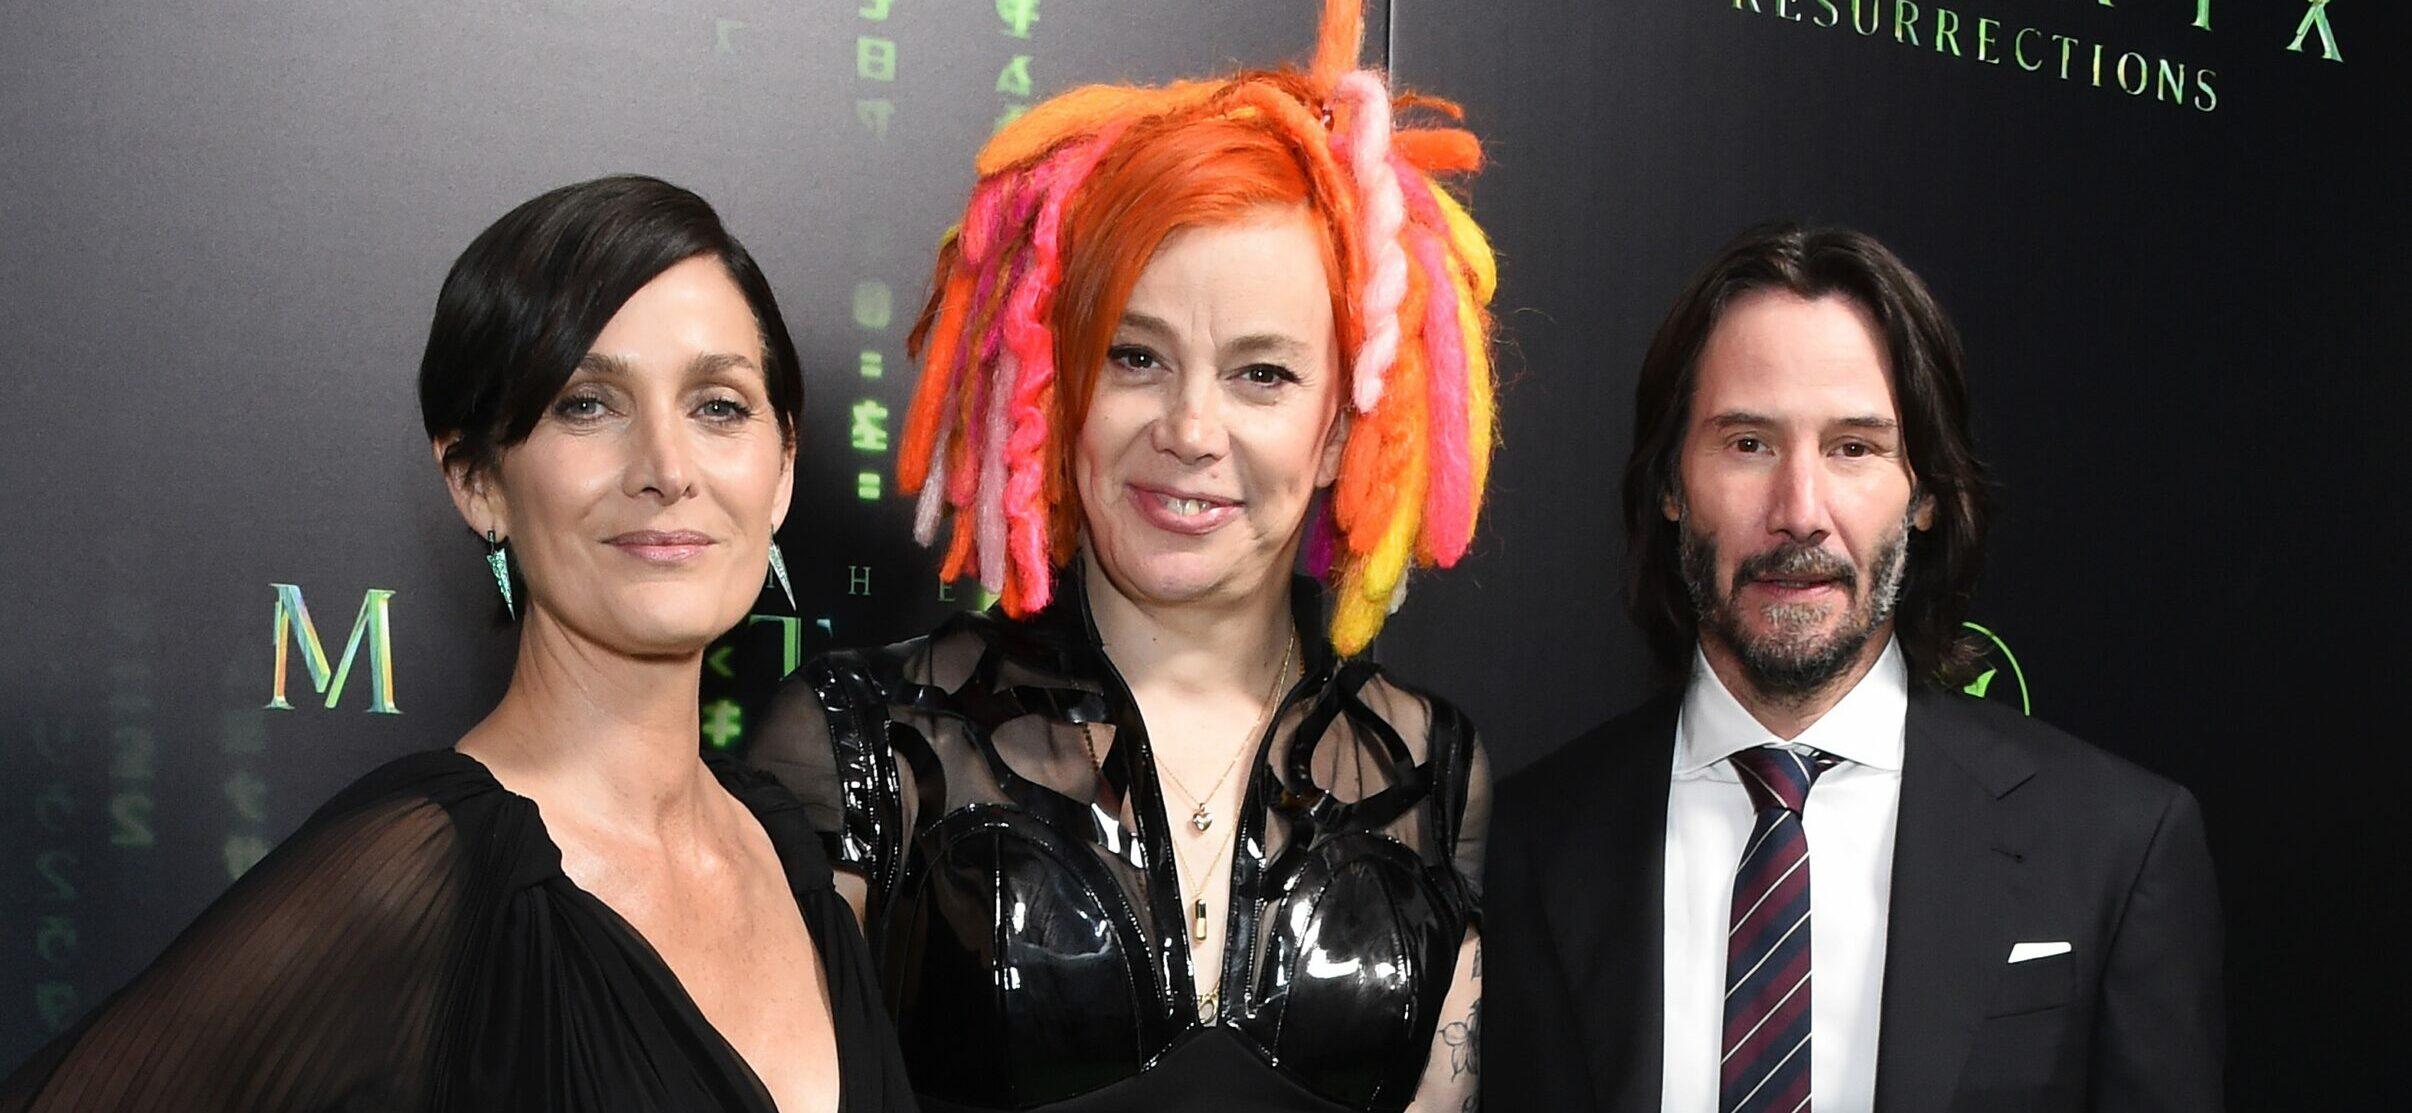 The Matrix Resurrections - San Francisco Premiere. 18 Dec 2021 Pictured: Carrie-Anne Moss, Lana Wachowski and Keanu Reeves.